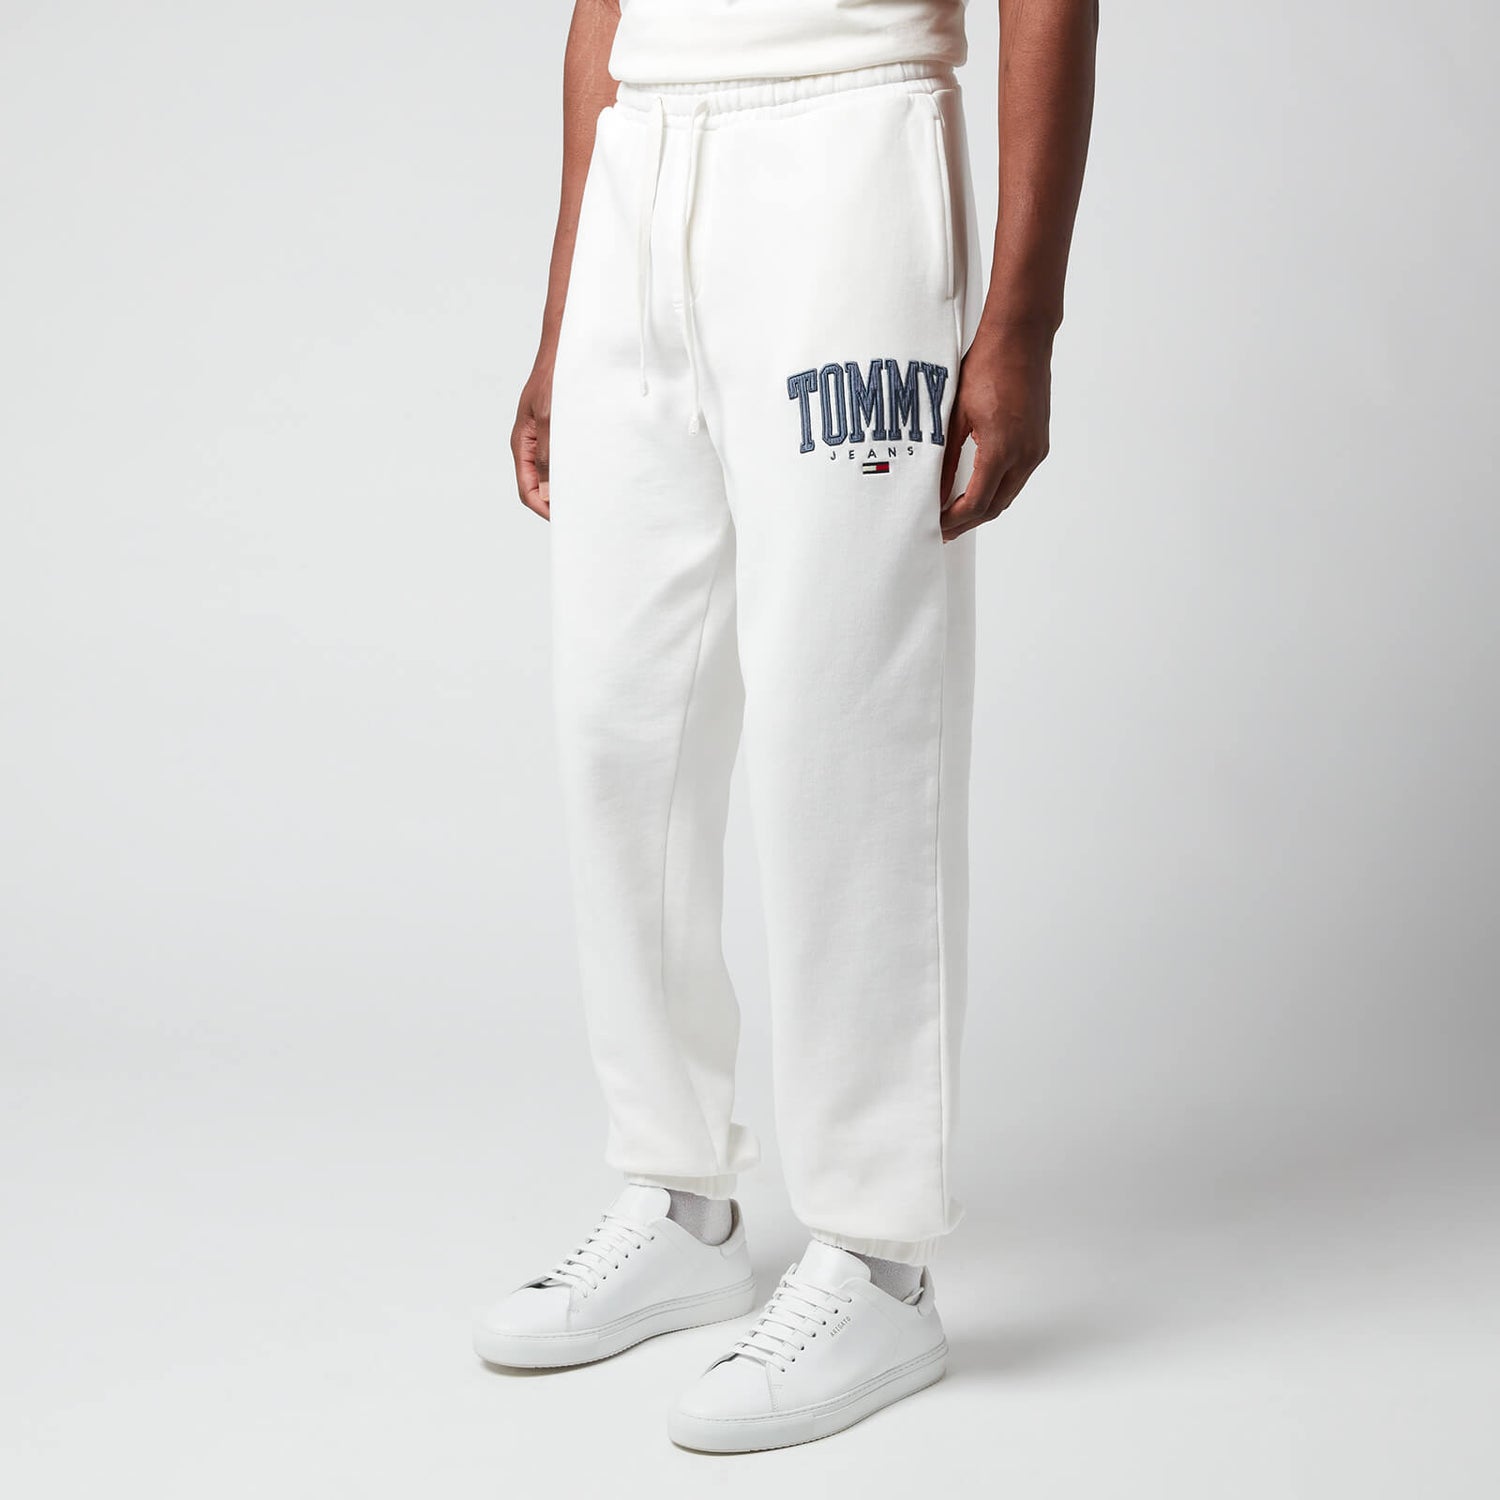 Tommy Jeans Men's Collegiate Relaxed Fit Sweatpants - Ivory Silk - S